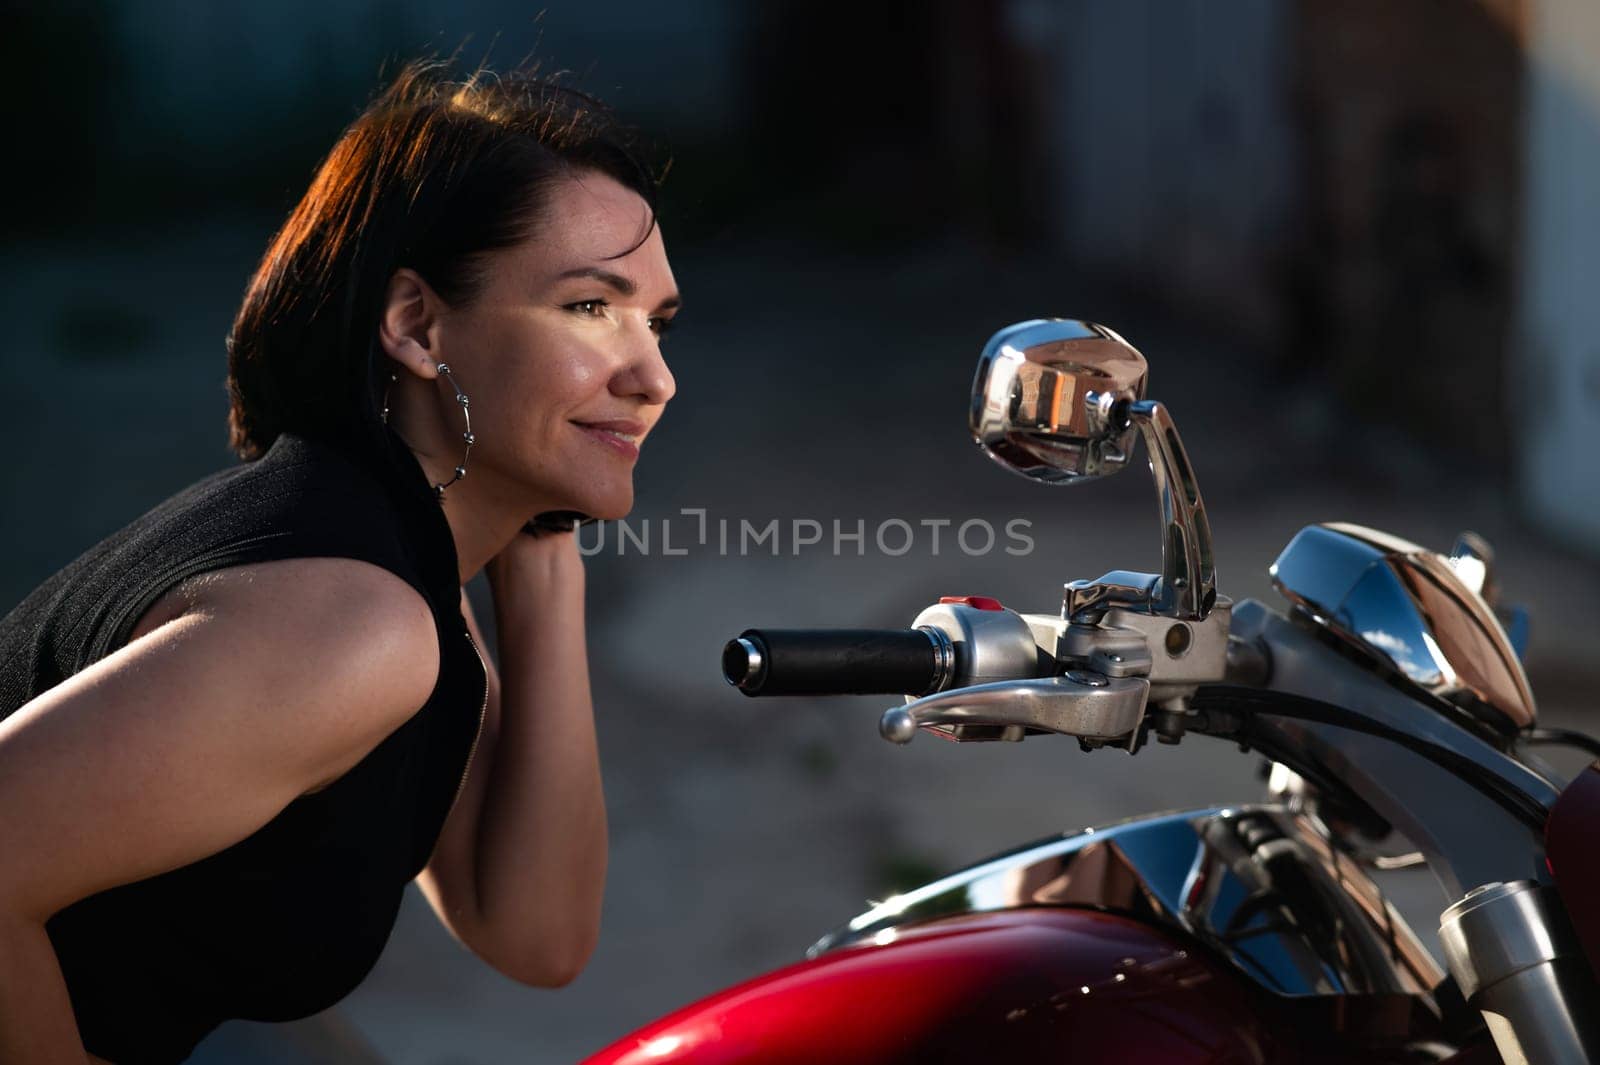 Brunette woman looks in the rearview mirror on a motorcycle